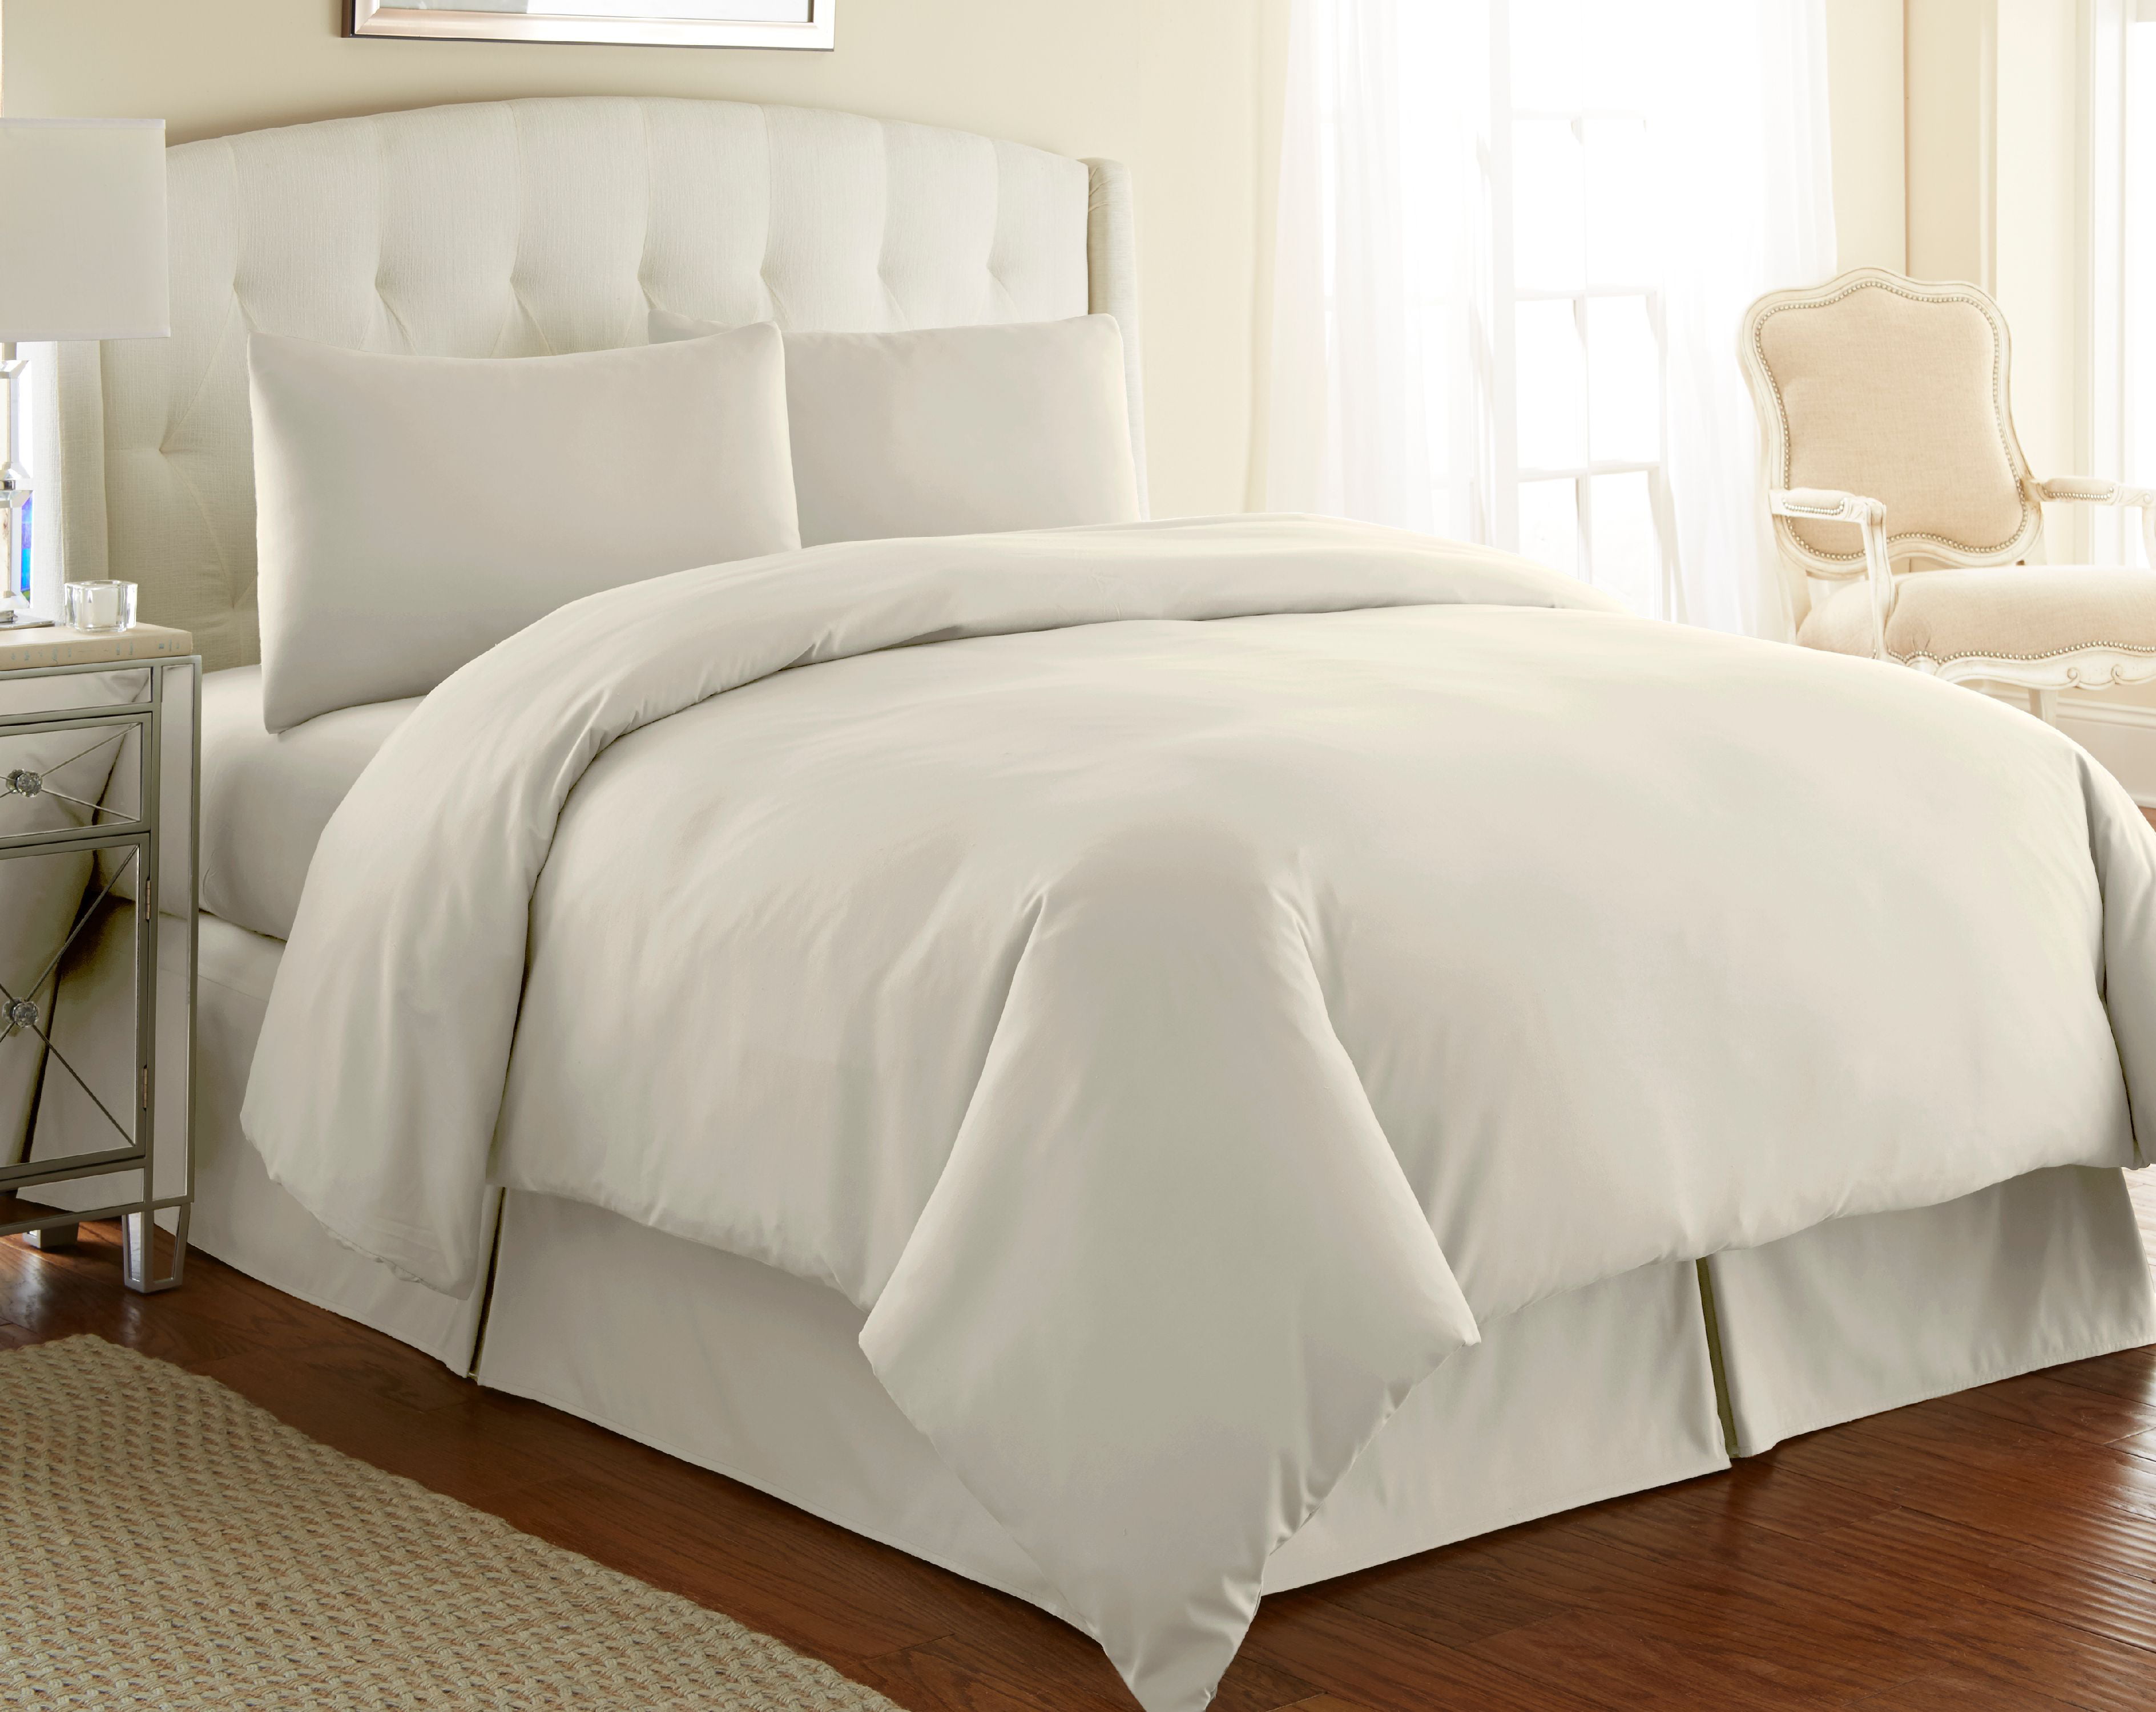 Details about   Pizuna Soft 600 Thread Count Cotton Full Flat Sheets White 1pc 100% Long Staple 